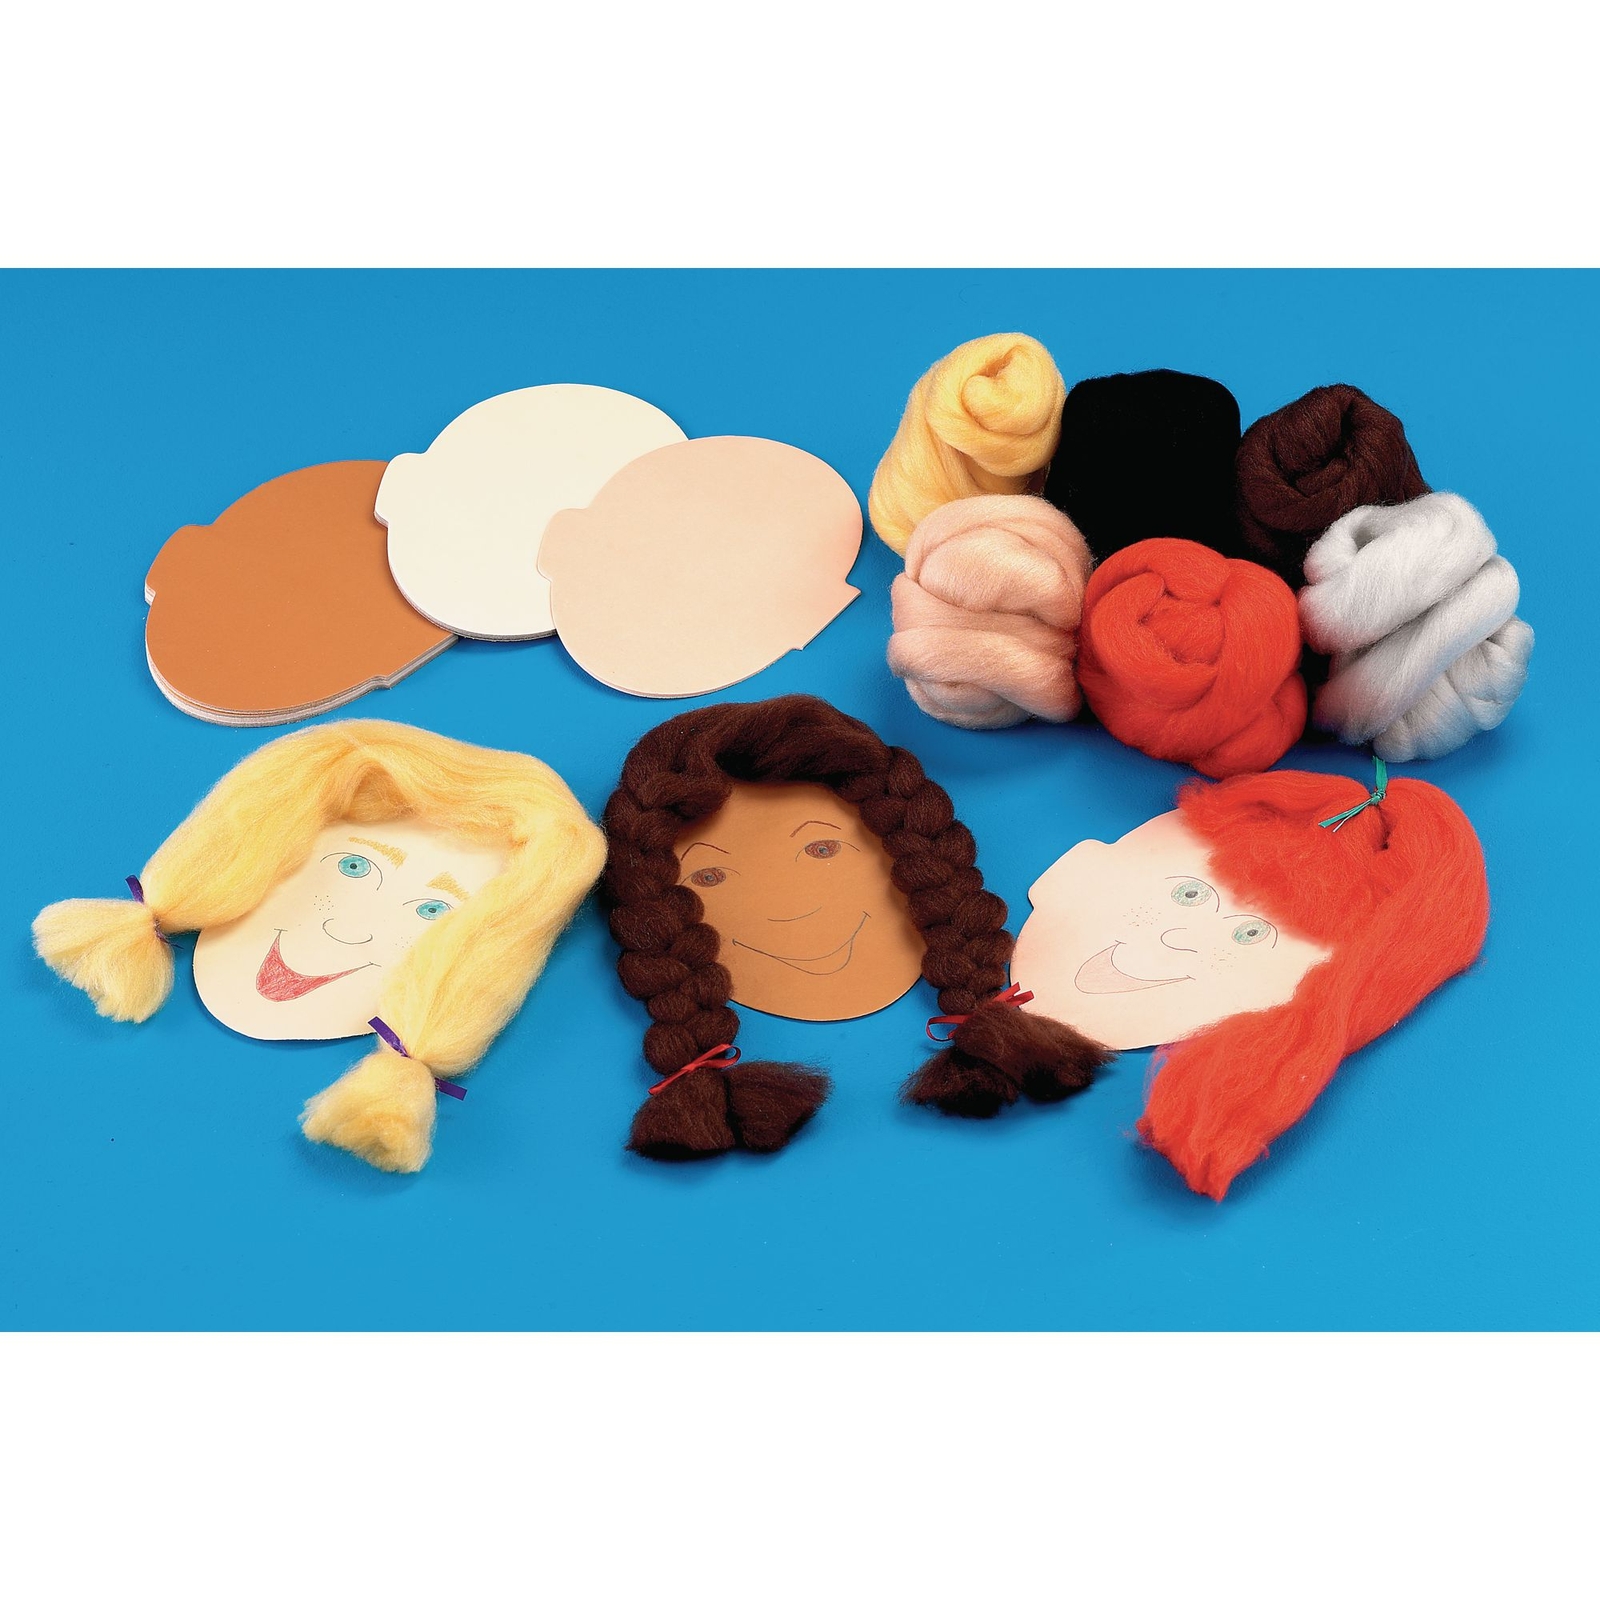 Hair Crafting Variety Kit - Assorted - Pack of 6